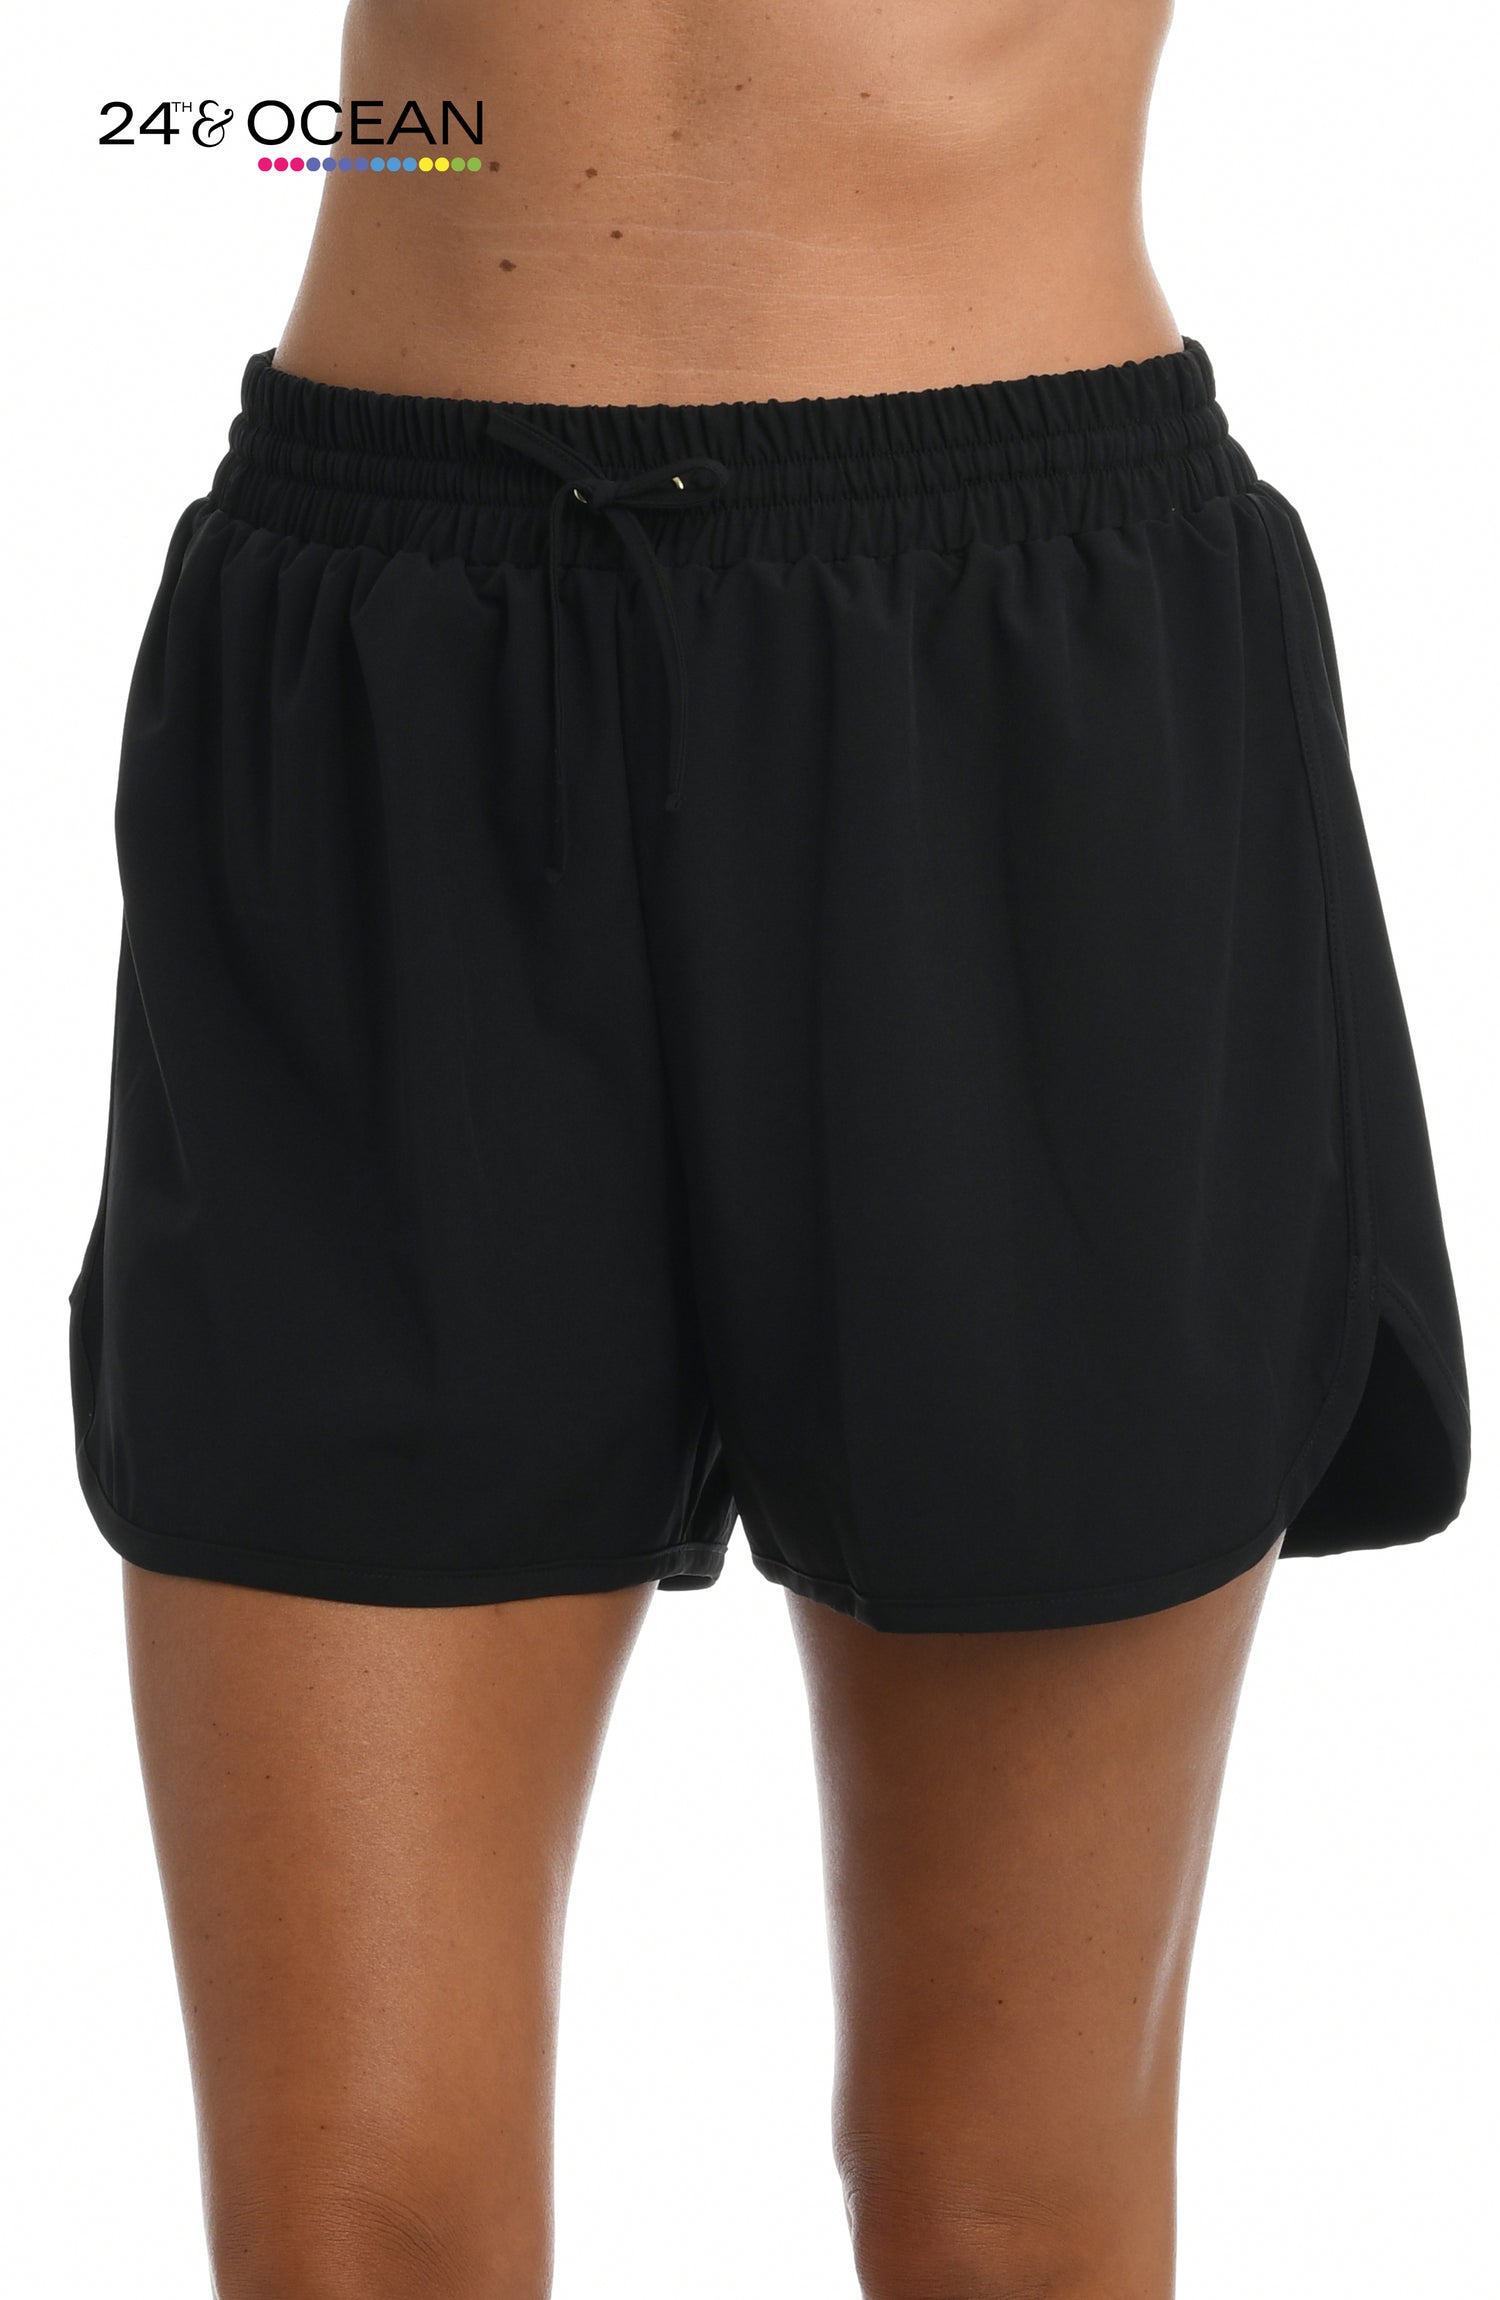 Model is wearing a solid black colored woven board short from our 24th & Ocean brand.